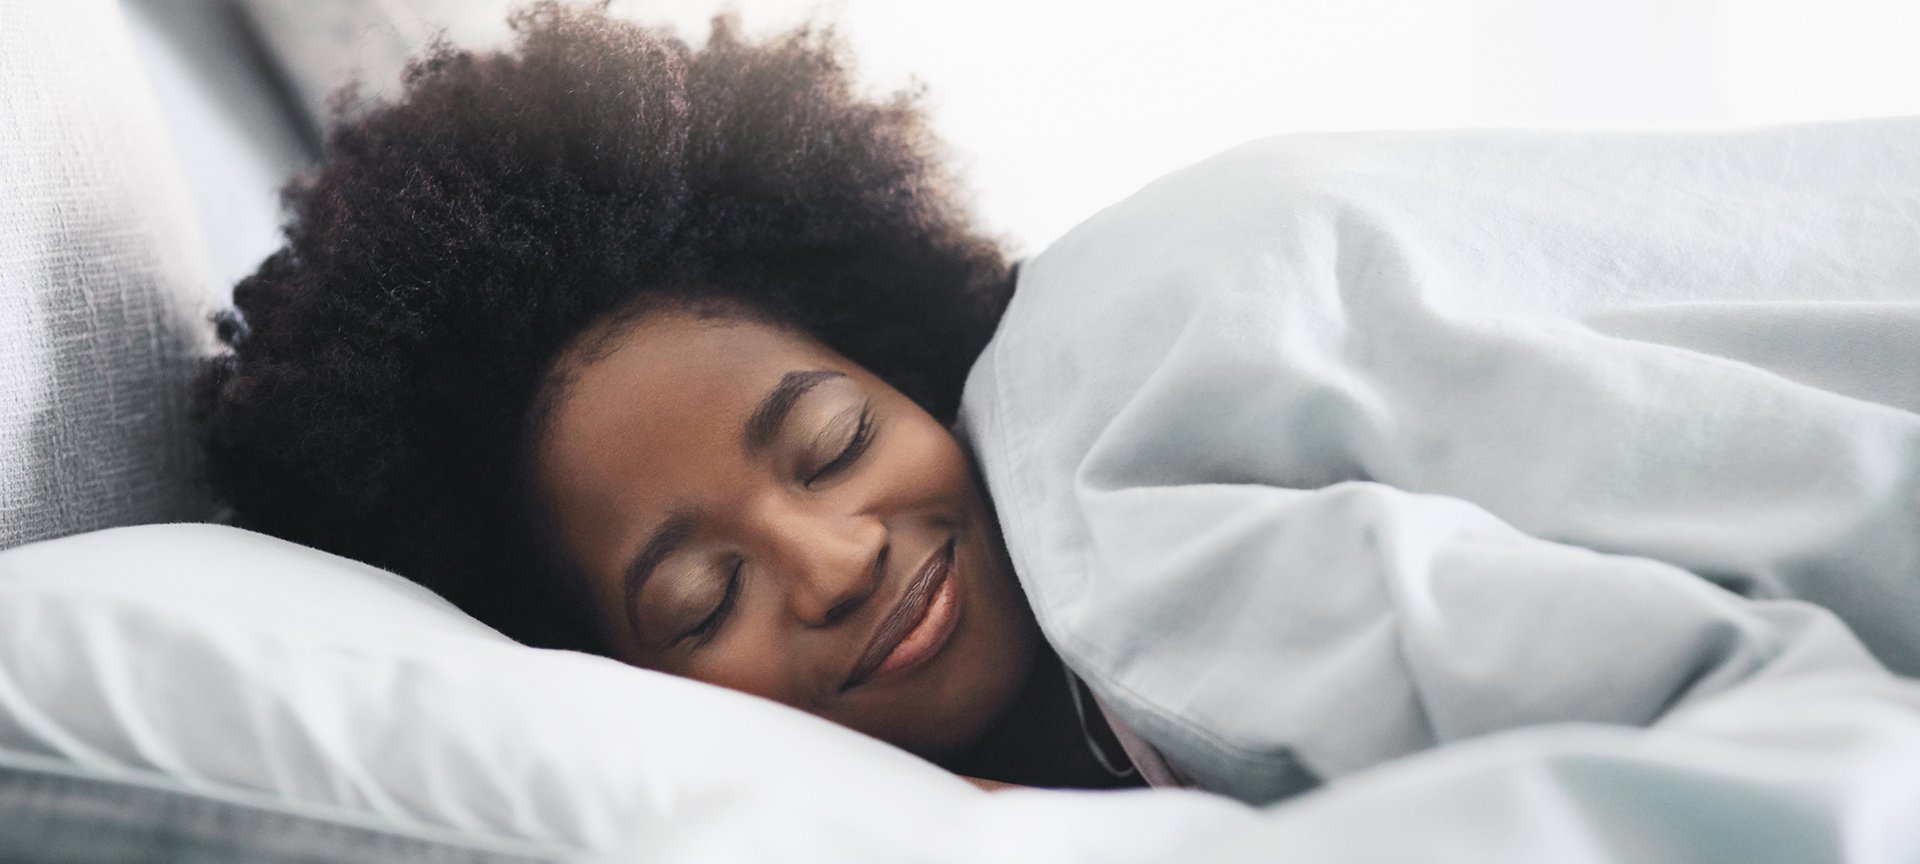 Protective Hairstyles for Sleeping: How to Protect Hair While You